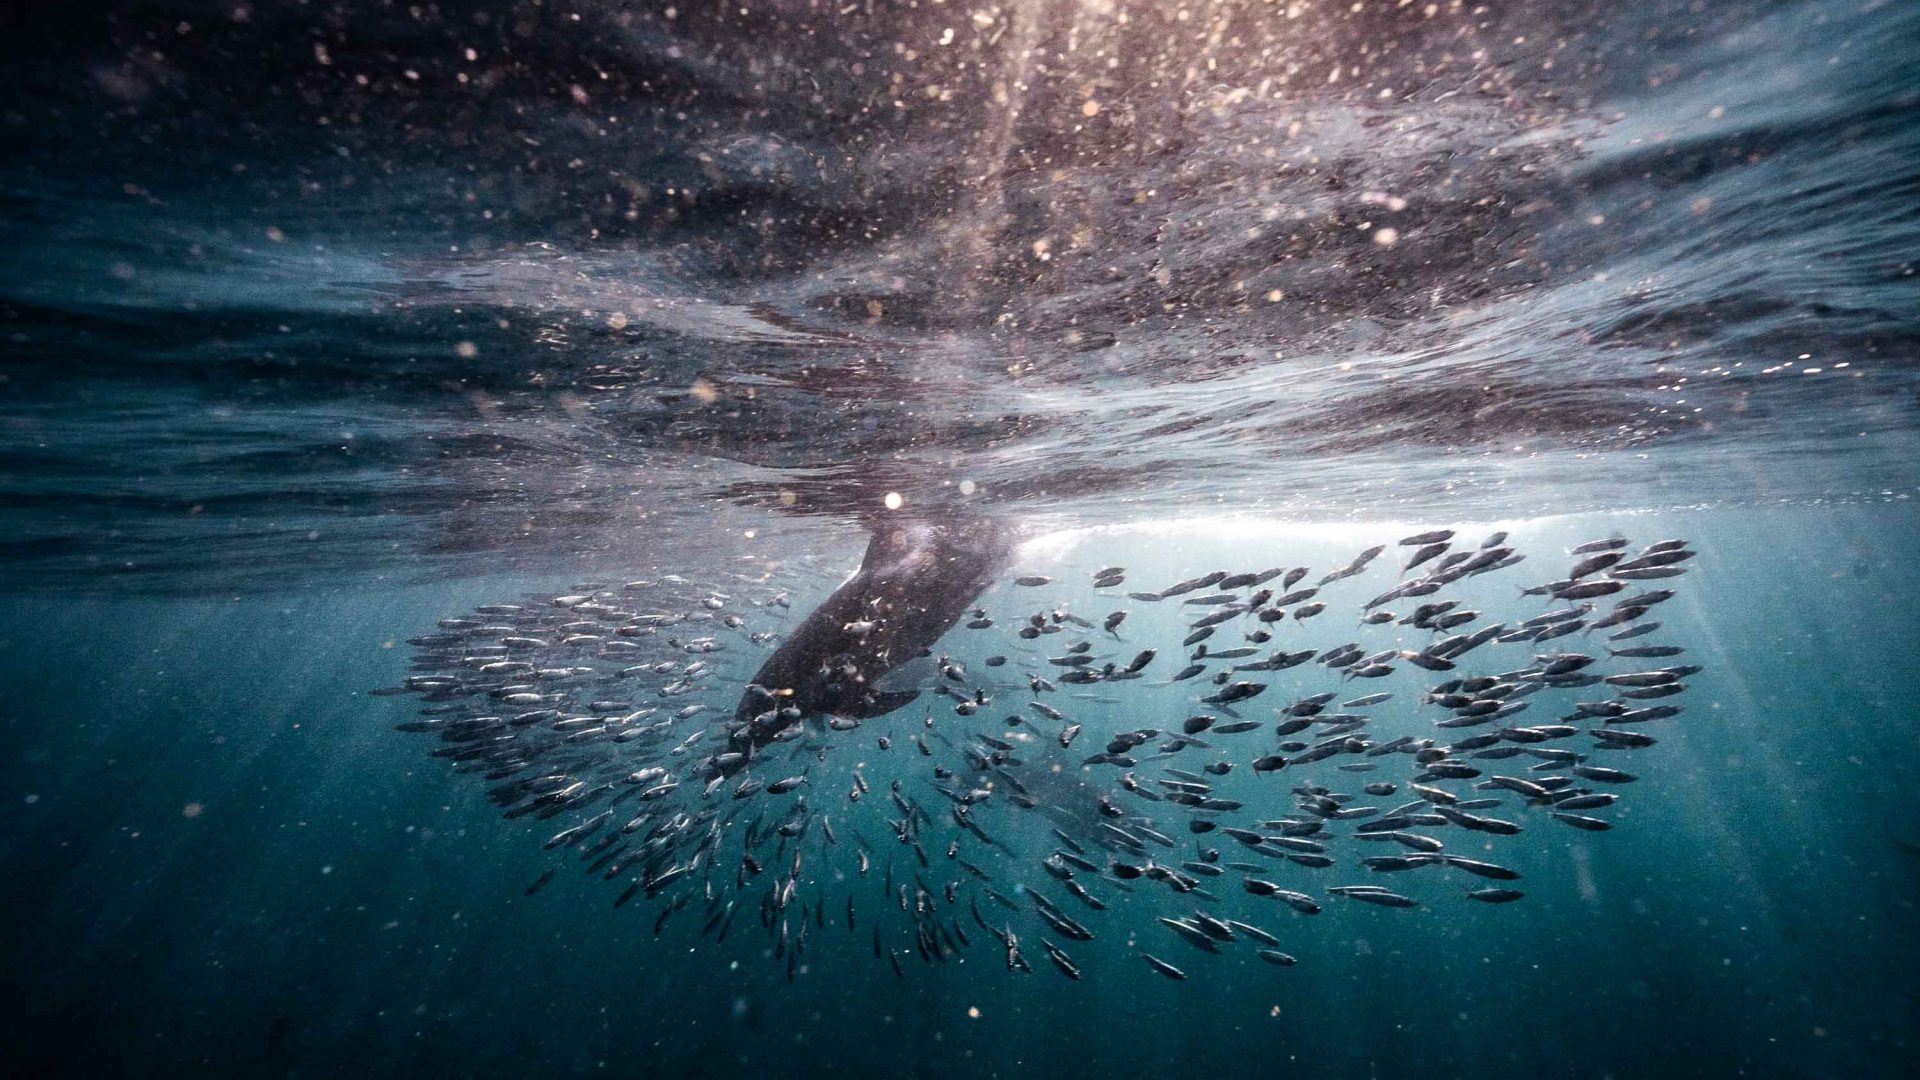 In South Africa, a monumental sardine migration draws throngs of tourists—but leaves locals in the cold